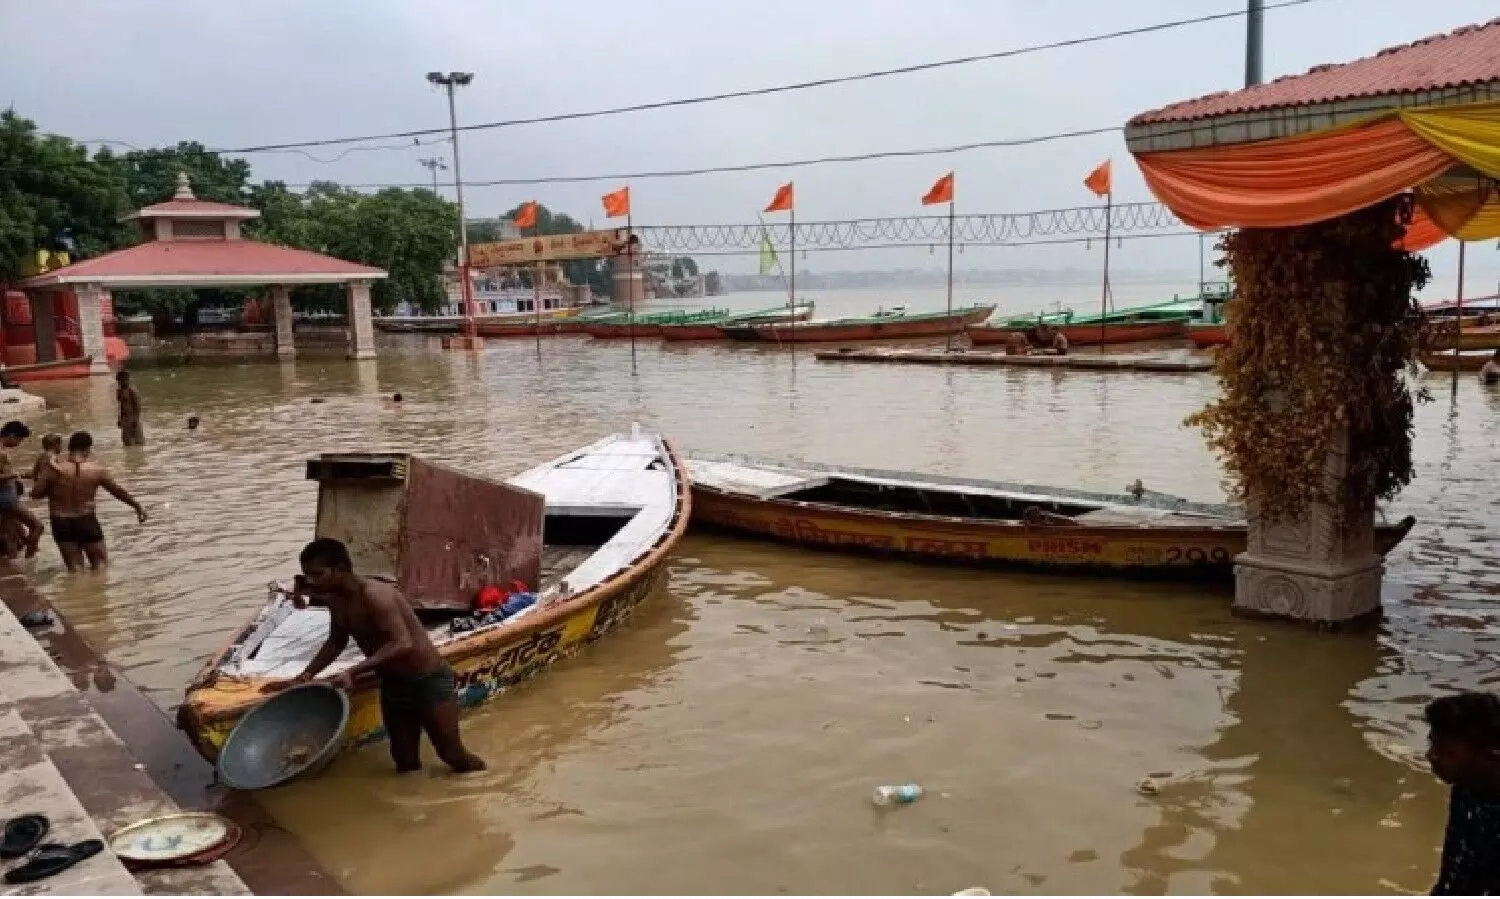 There is a danger of flood in the Ganges, the connection of the Ghats started breaking